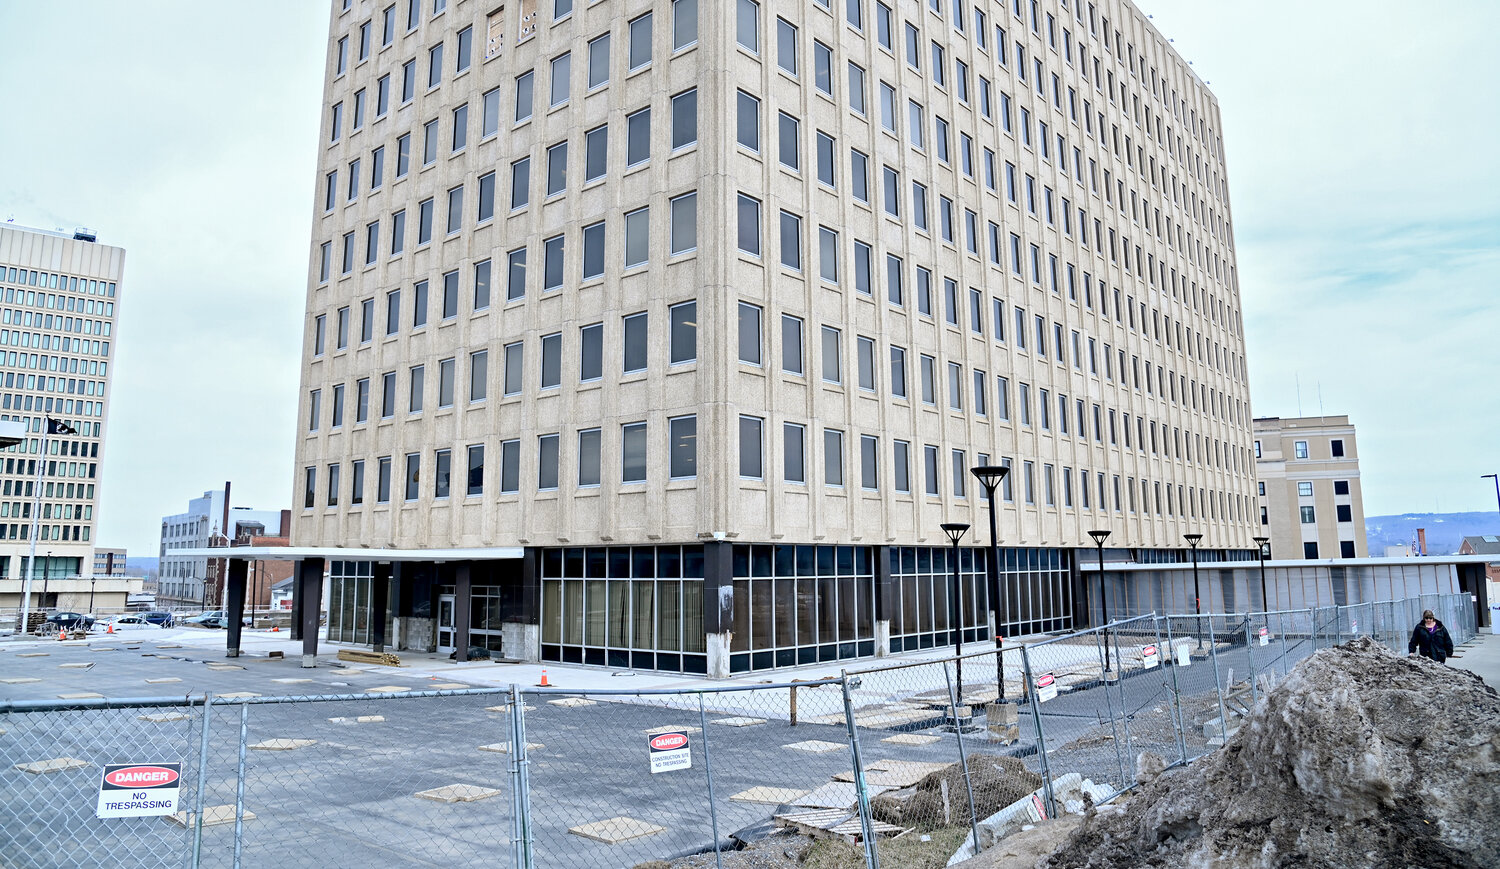 The Oneida County office building at 800 Park Ave. in Utica is shown on Friday, March 10. Last week county lawmakers approved borrowing $3.5 million for asbestos removal at the building. That project is one of 12 capital improvement projects including in $17 million in bonding that was authorized.